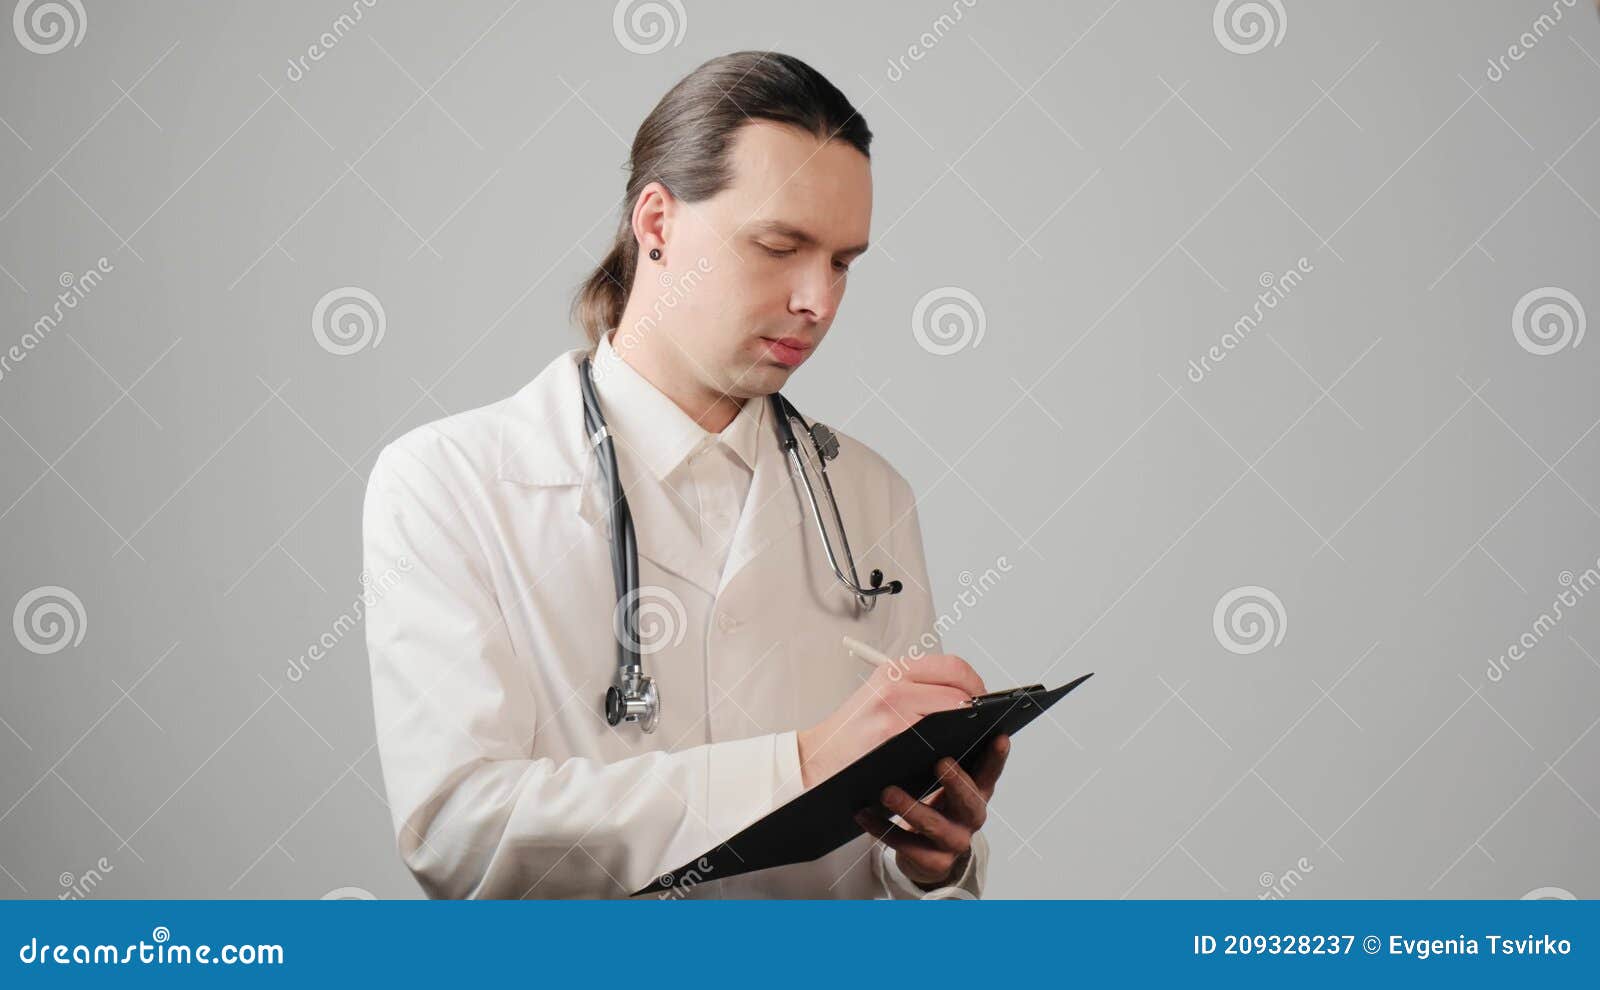 Cheerful Patient In Gown Looking At Blurred Free Stock Photo and Image  632104982